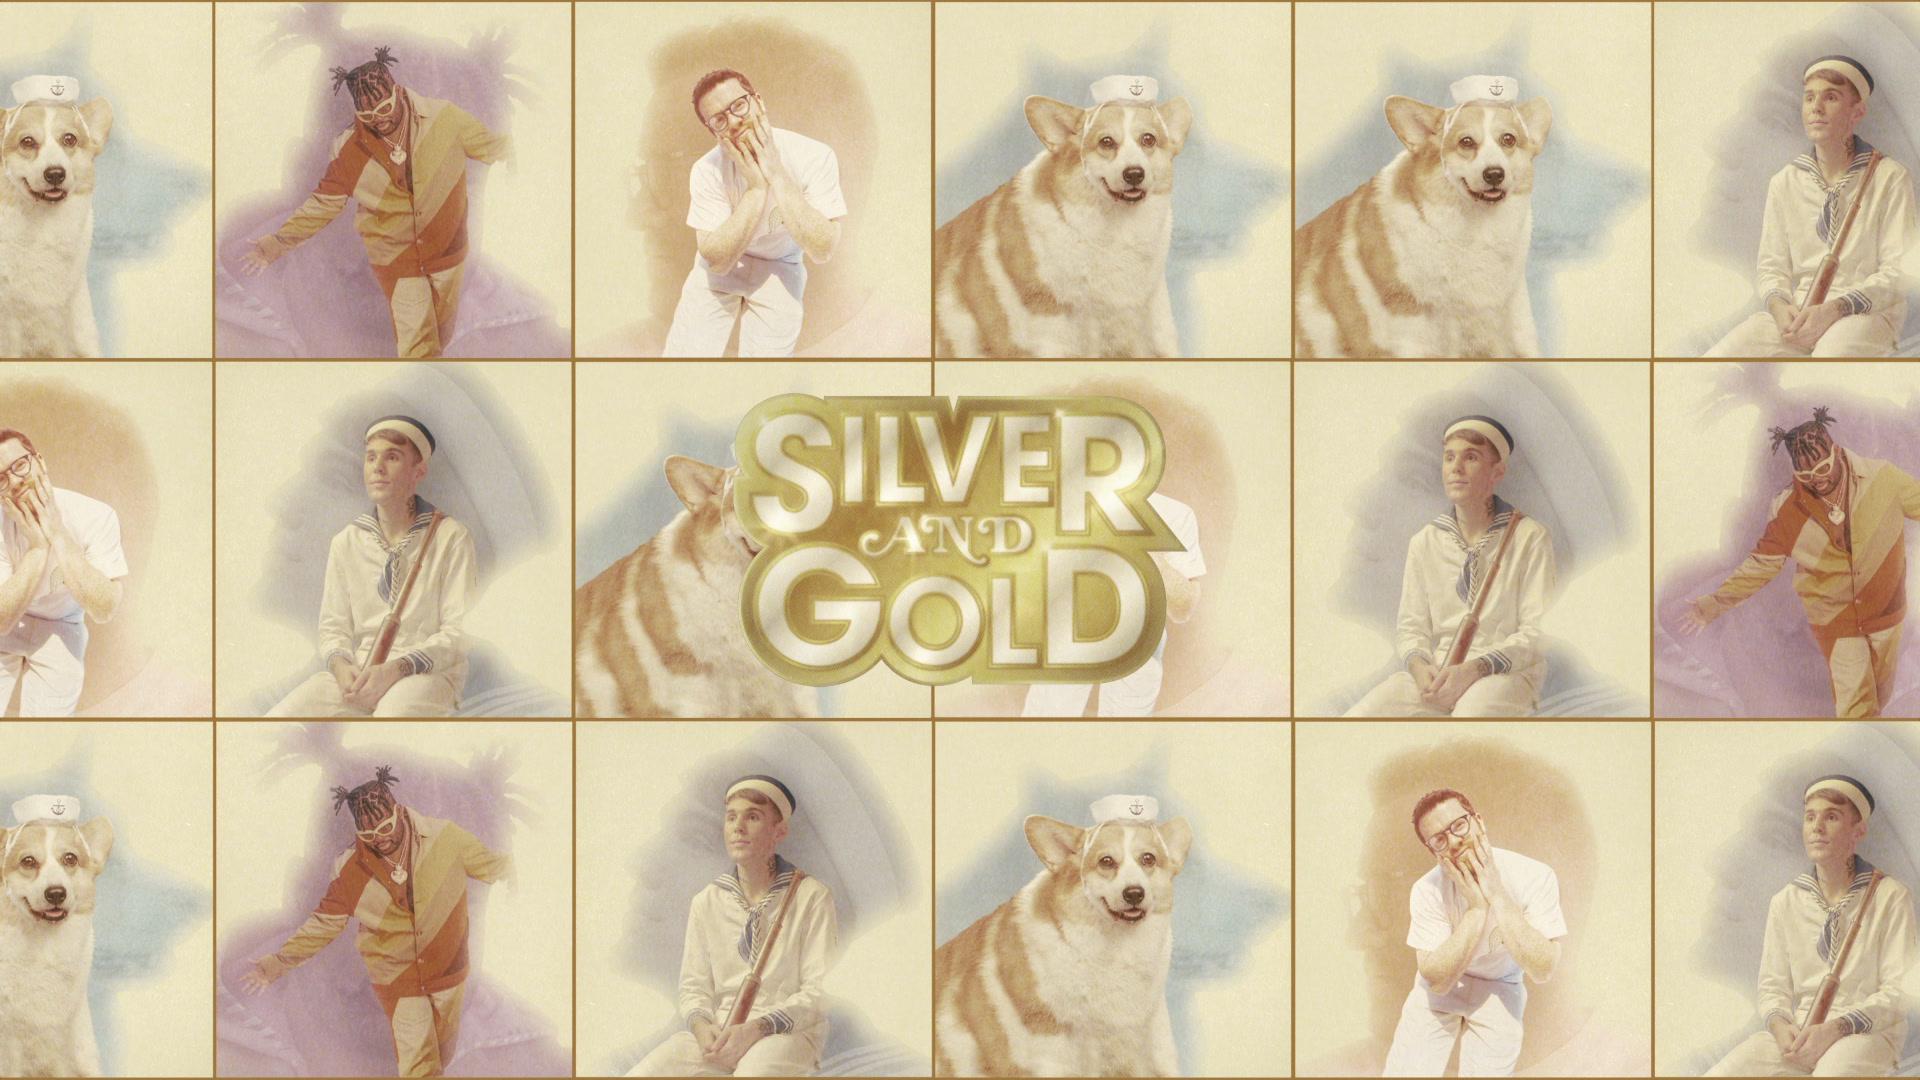 YUNG BAE - Silver and Gold